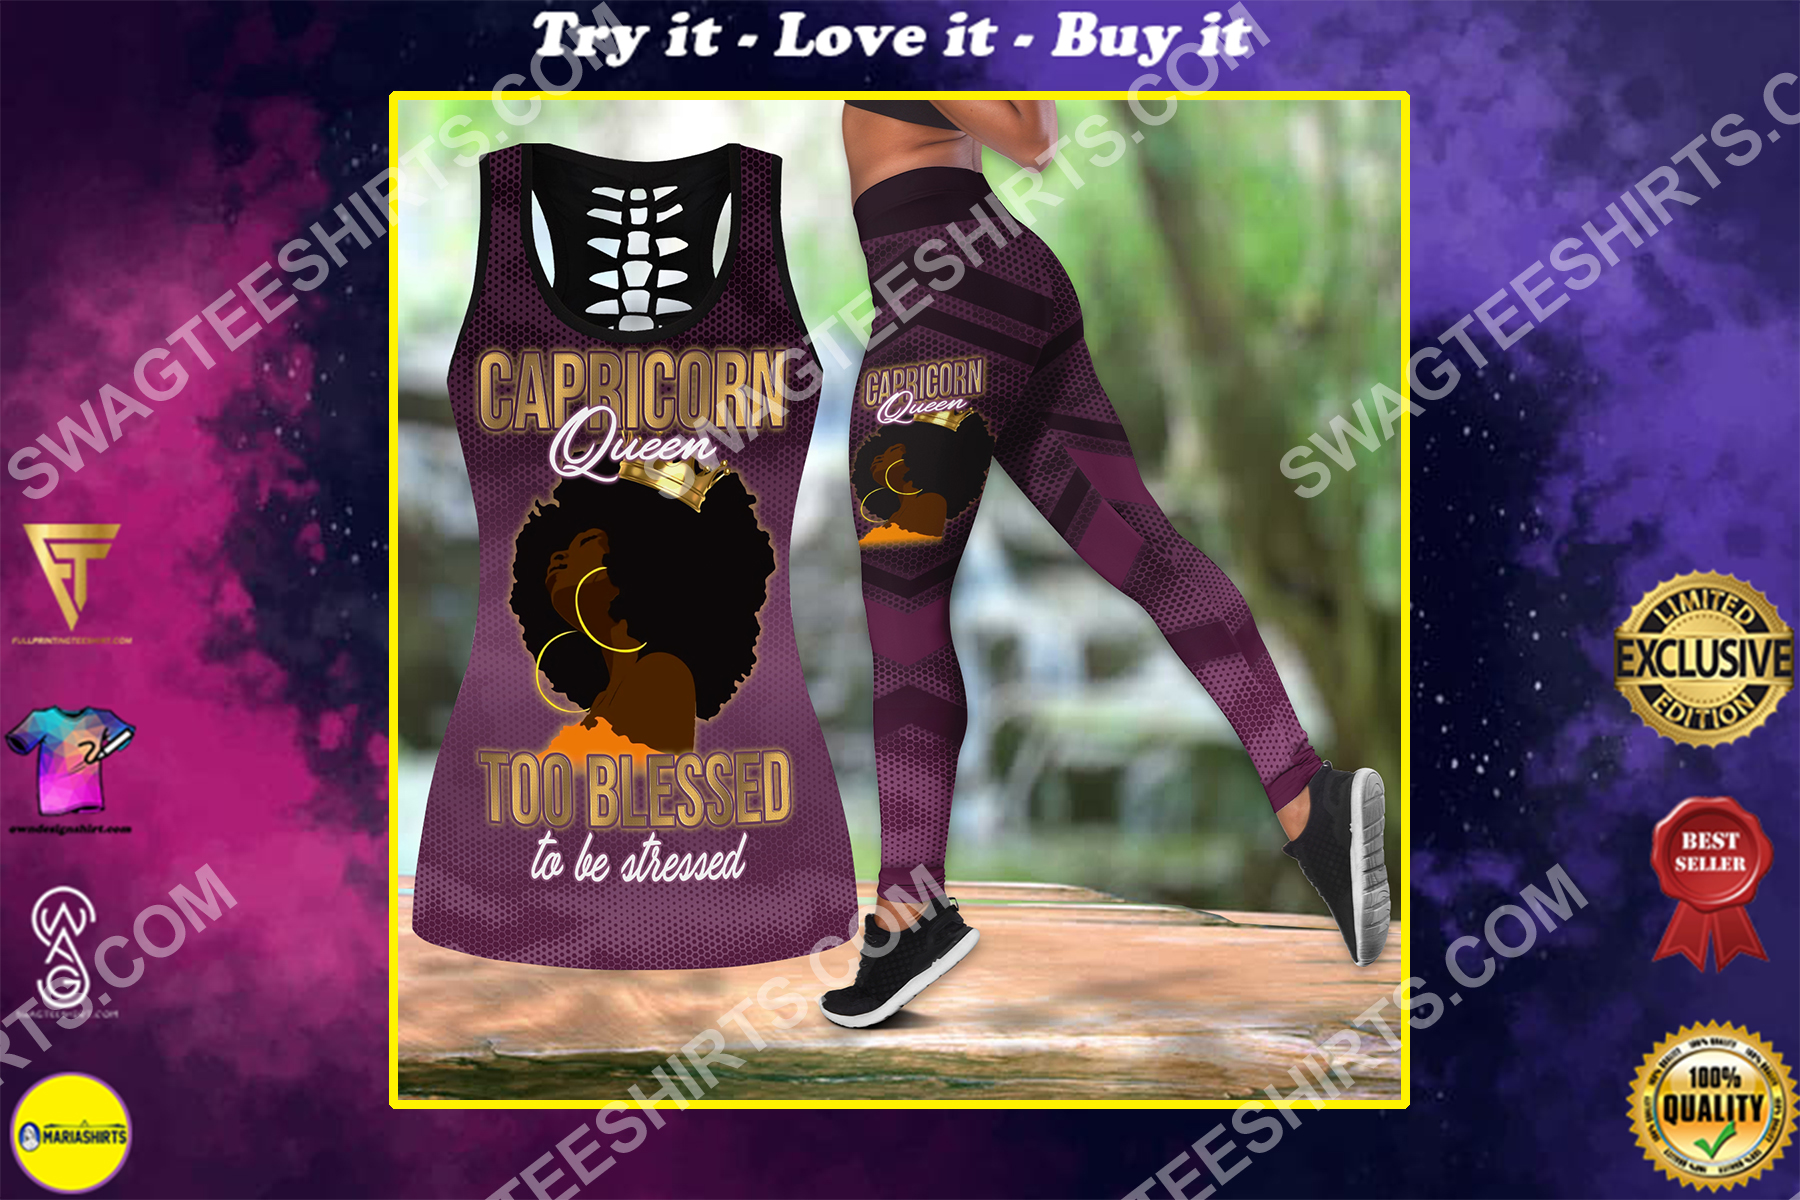 capricon queen too blessed to be stressed birthday gift set sports outfit